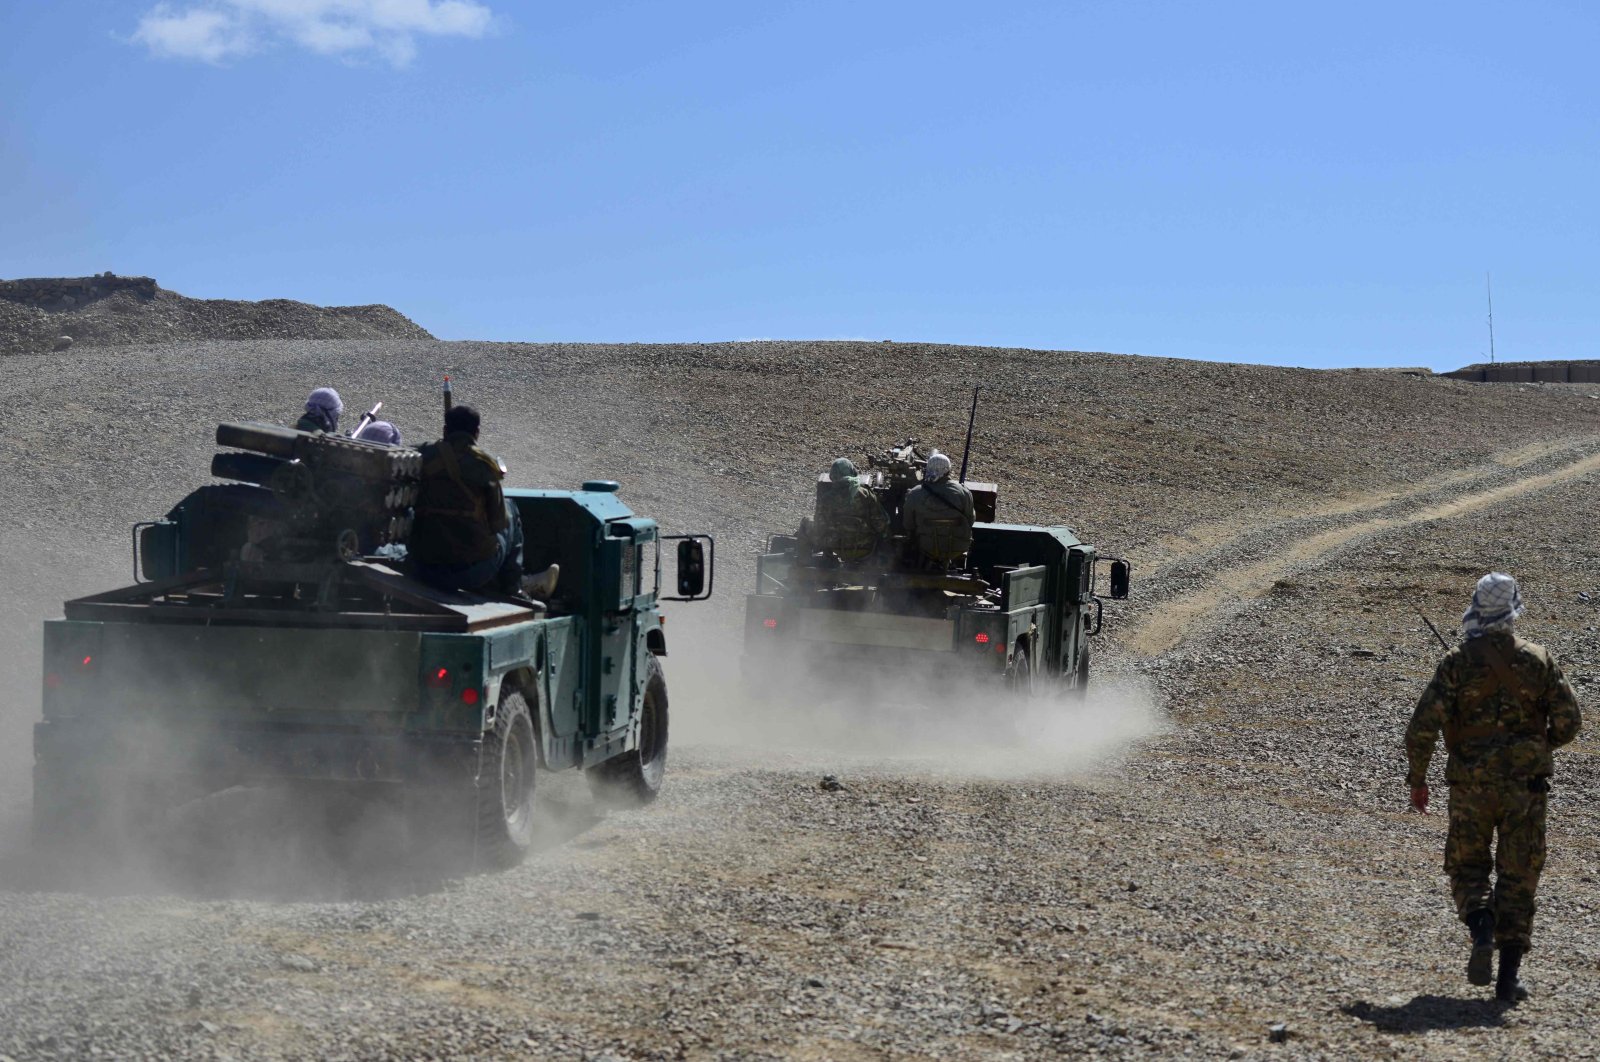 Afghan resistance movement and anti-Taliban uprising forces personnel patrol in armored humvees at an outpost in Kotal-e Anjuman of Paryan district in Panjshir province, Afghanistan, Aug. 23, 2021. (AFP Photo)